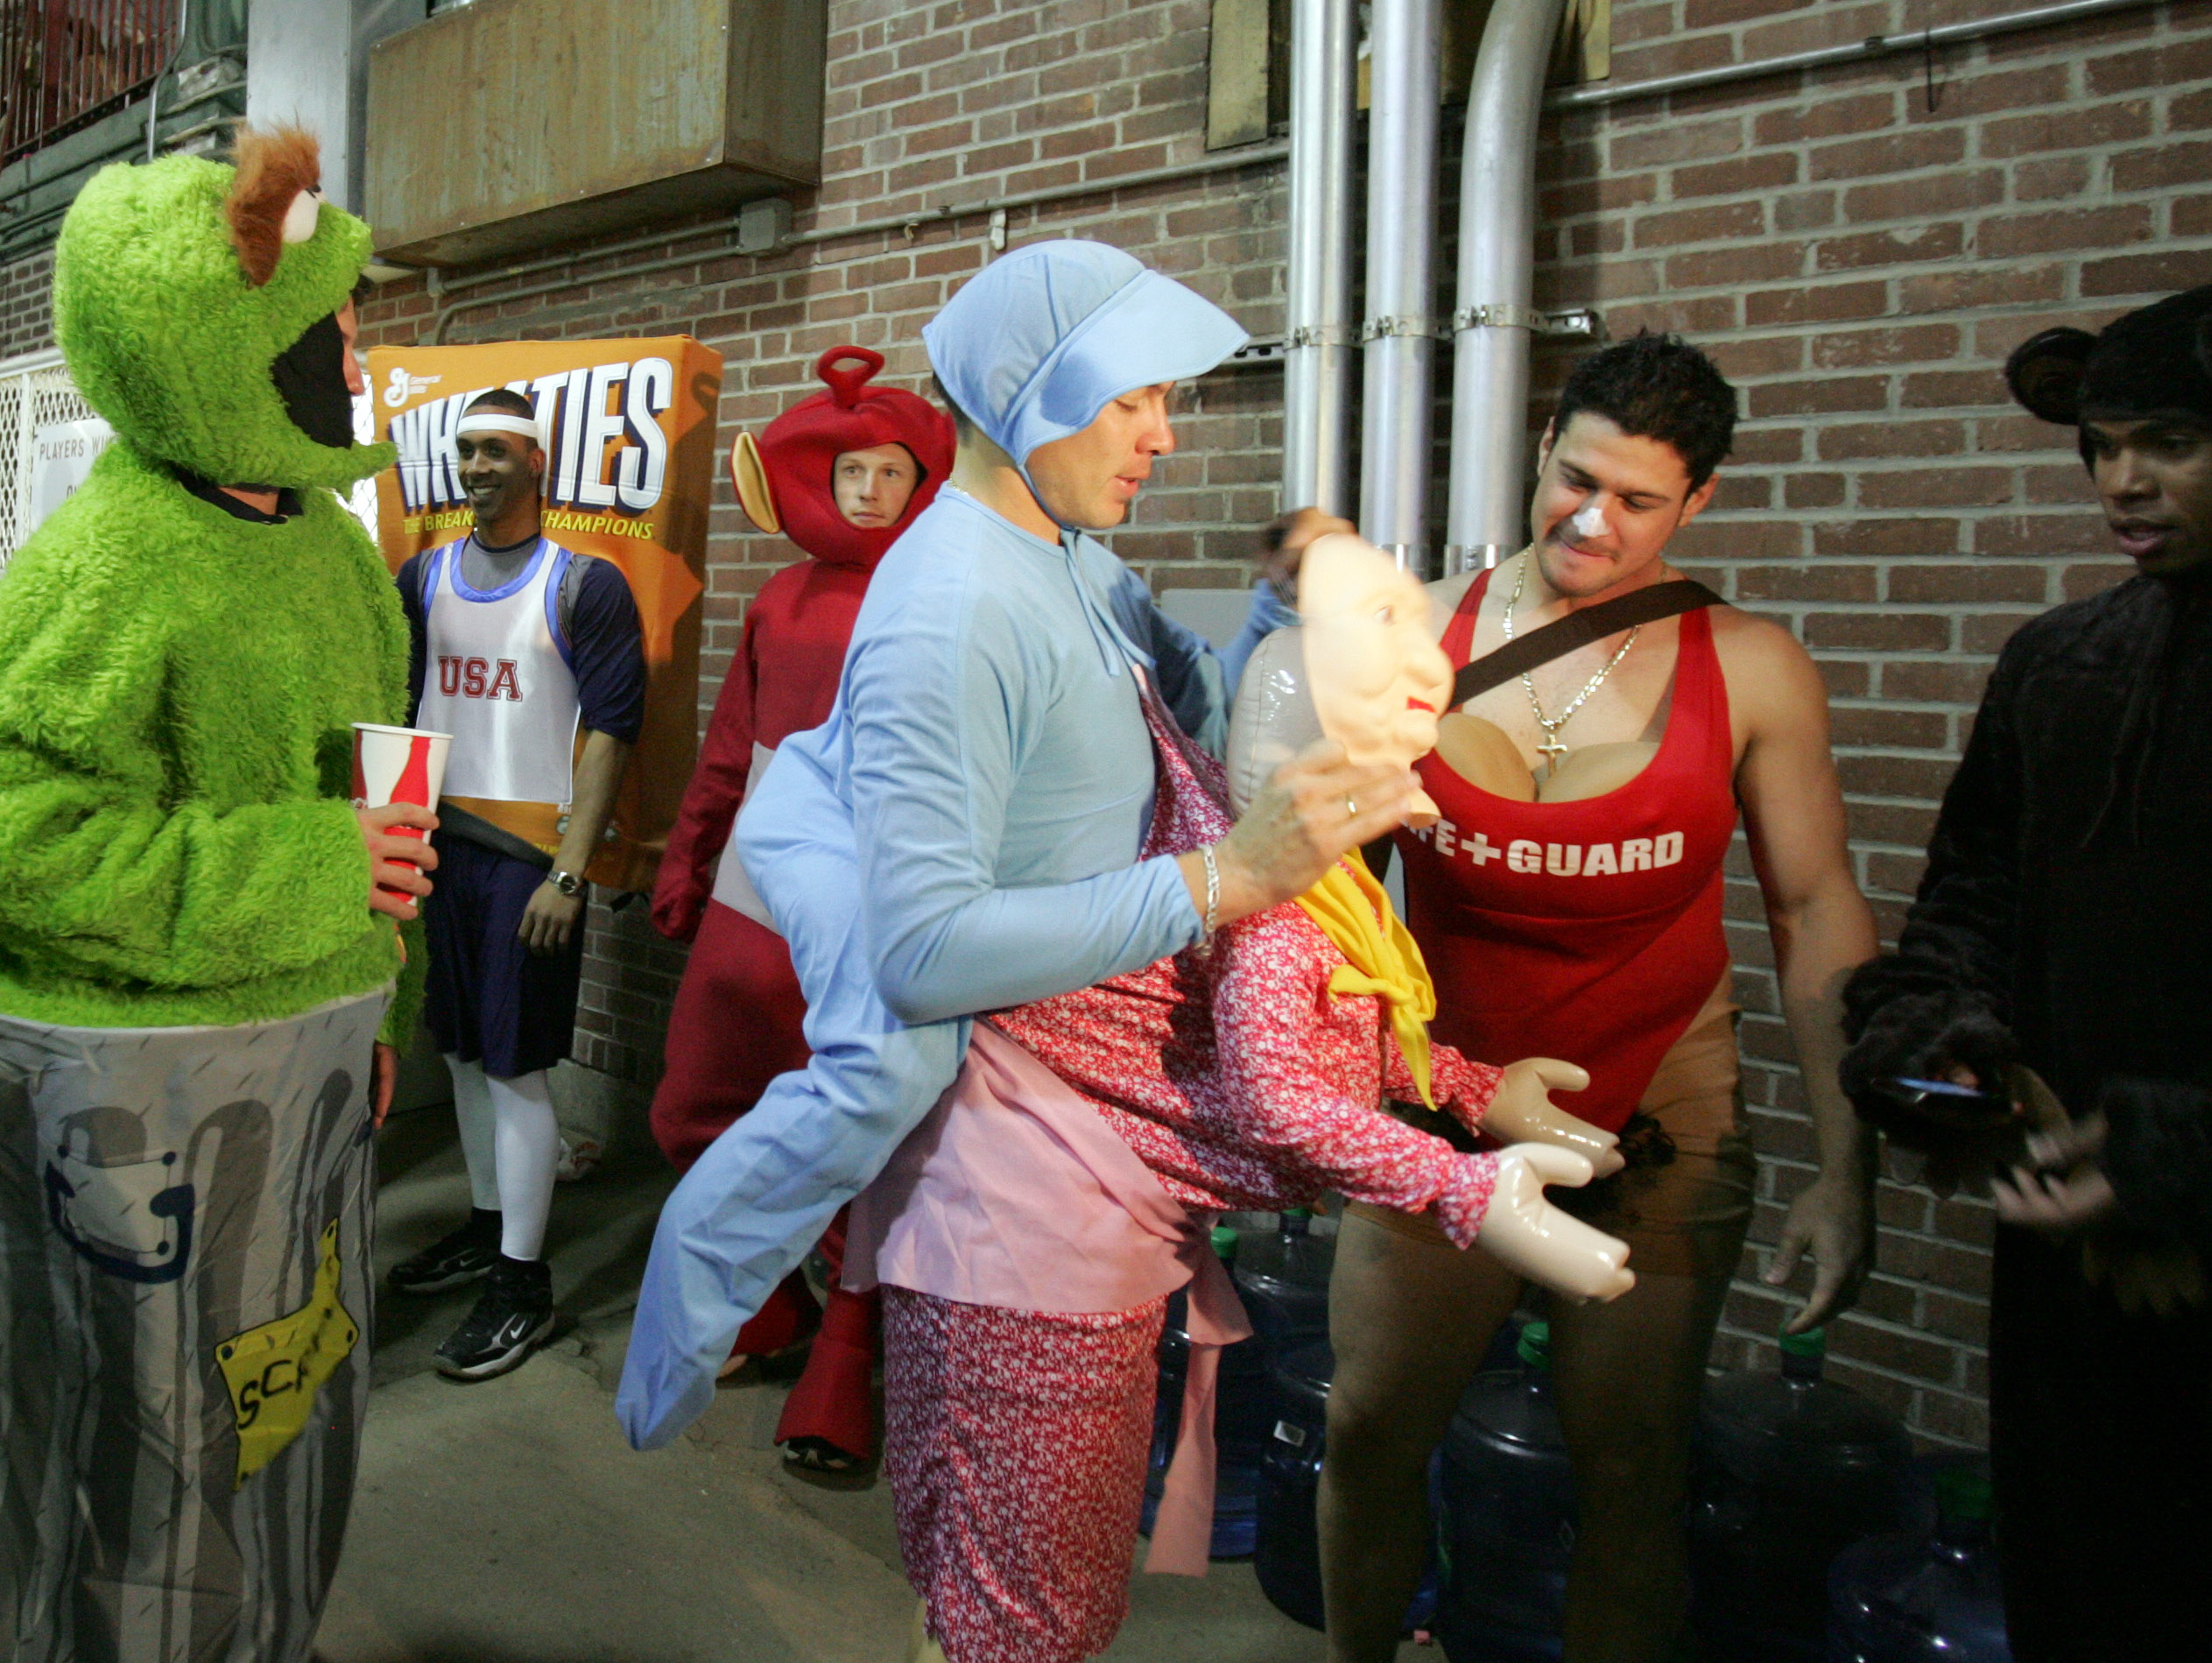 Cleveland Indians rookies mill about outside the club house at Fenway Park as part of a hazing event after their 6-2 loss to the Boston Red Sox in an MLB baseball game in Boston, Friday, Oct. 2, 2009. (AP Photo/Mary Schwalm)